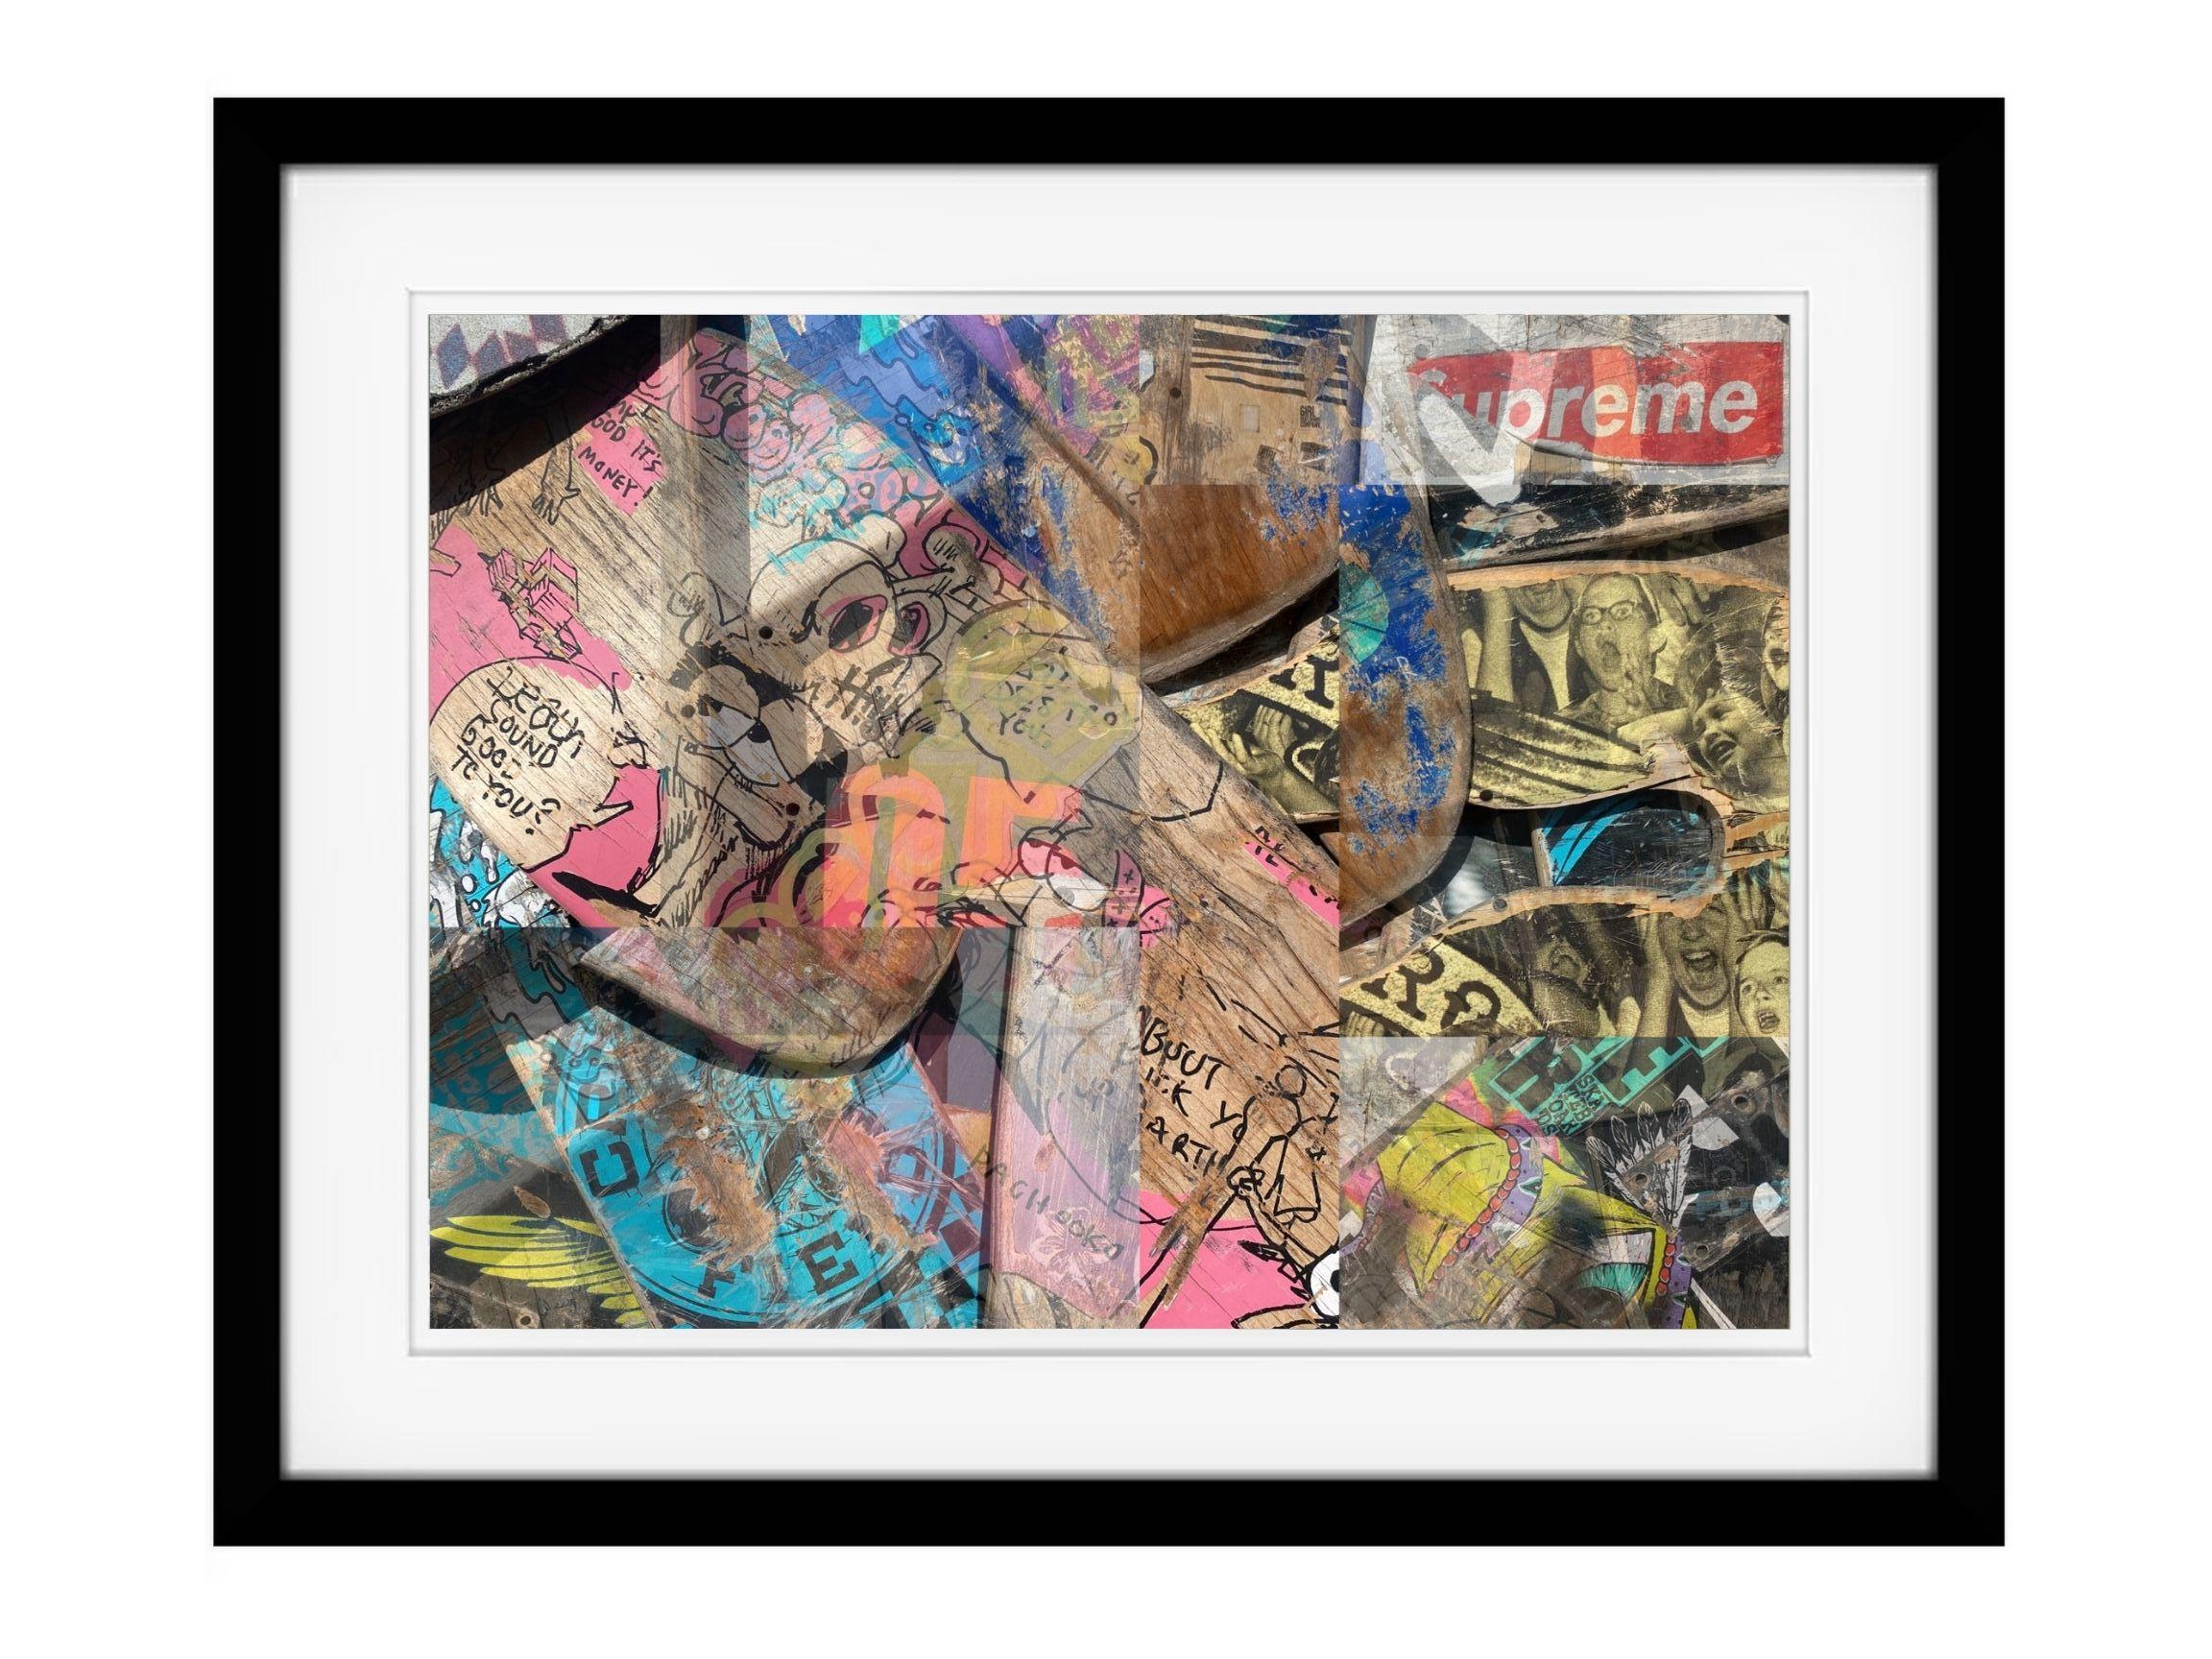 CS25 - is #25 in the series (created in 2021). It was created in Santa Barbara, California. The collage was made out of the photographs of different skateboards hung on the wall of a shop. The work is multicolored, has some logos, stickers, brands'